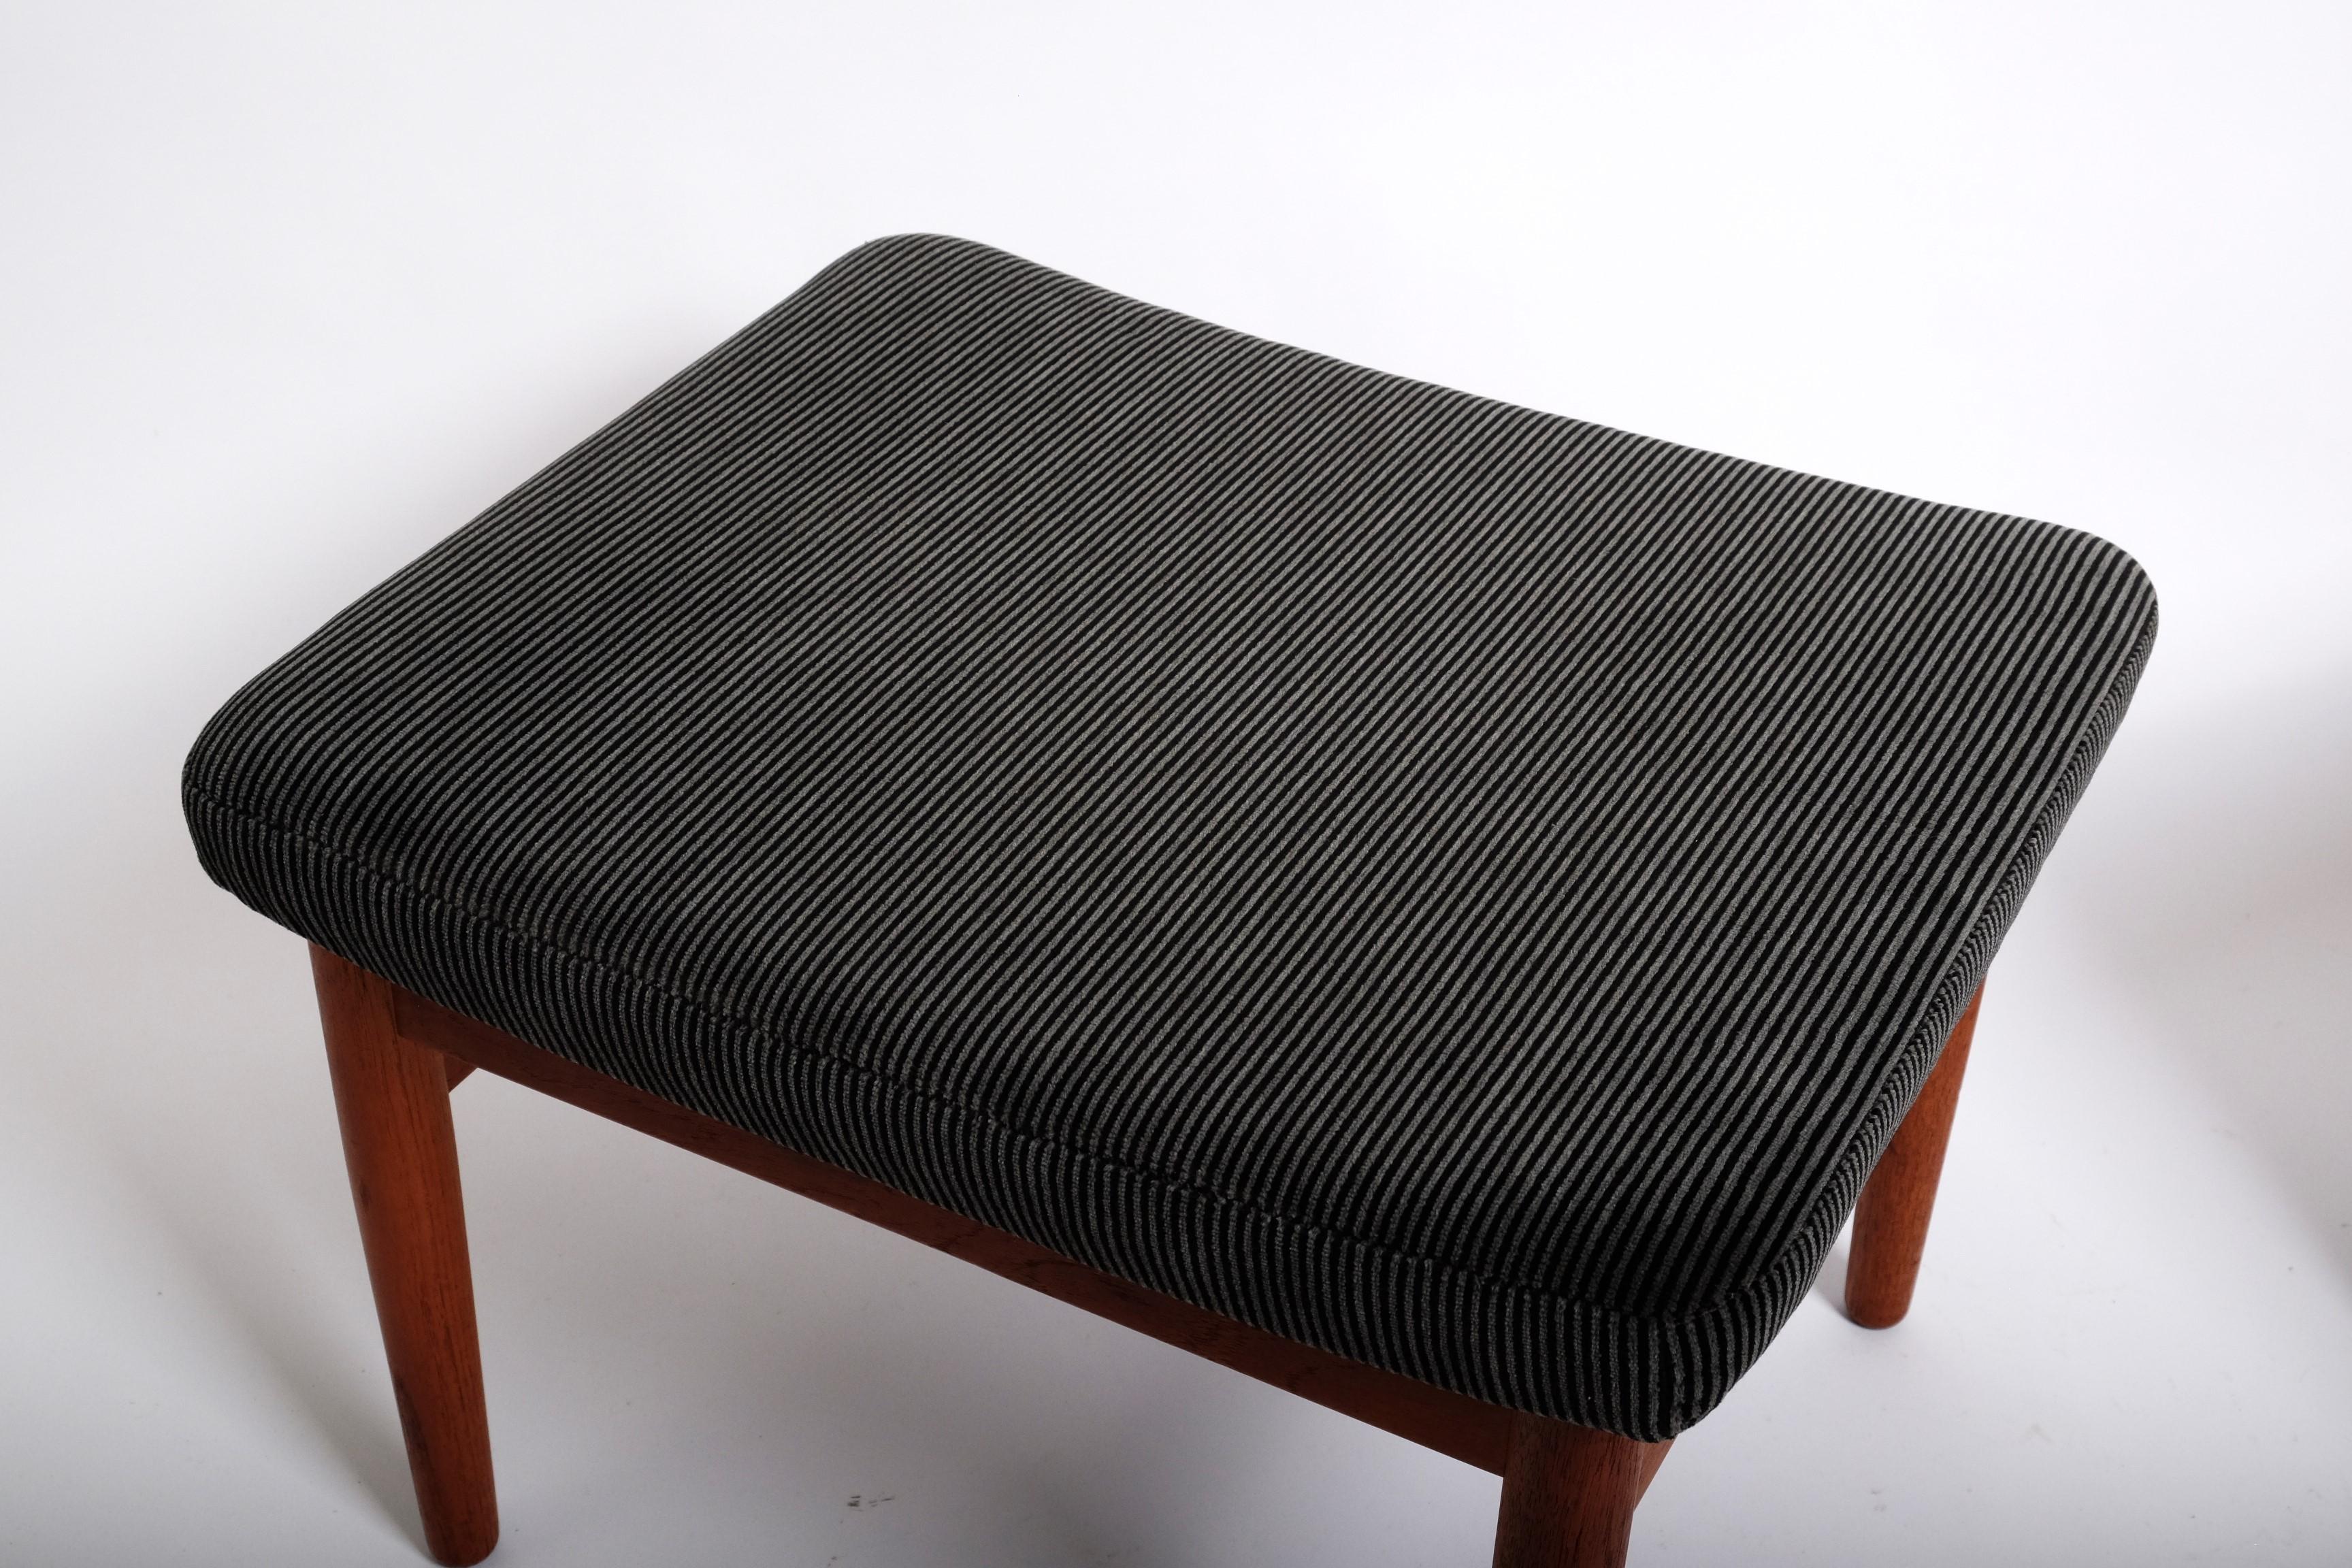 Two Mid-Century Stools by Arne Vodder FD164 Ottomans France & Son, Denmark 1960s For Sale 11